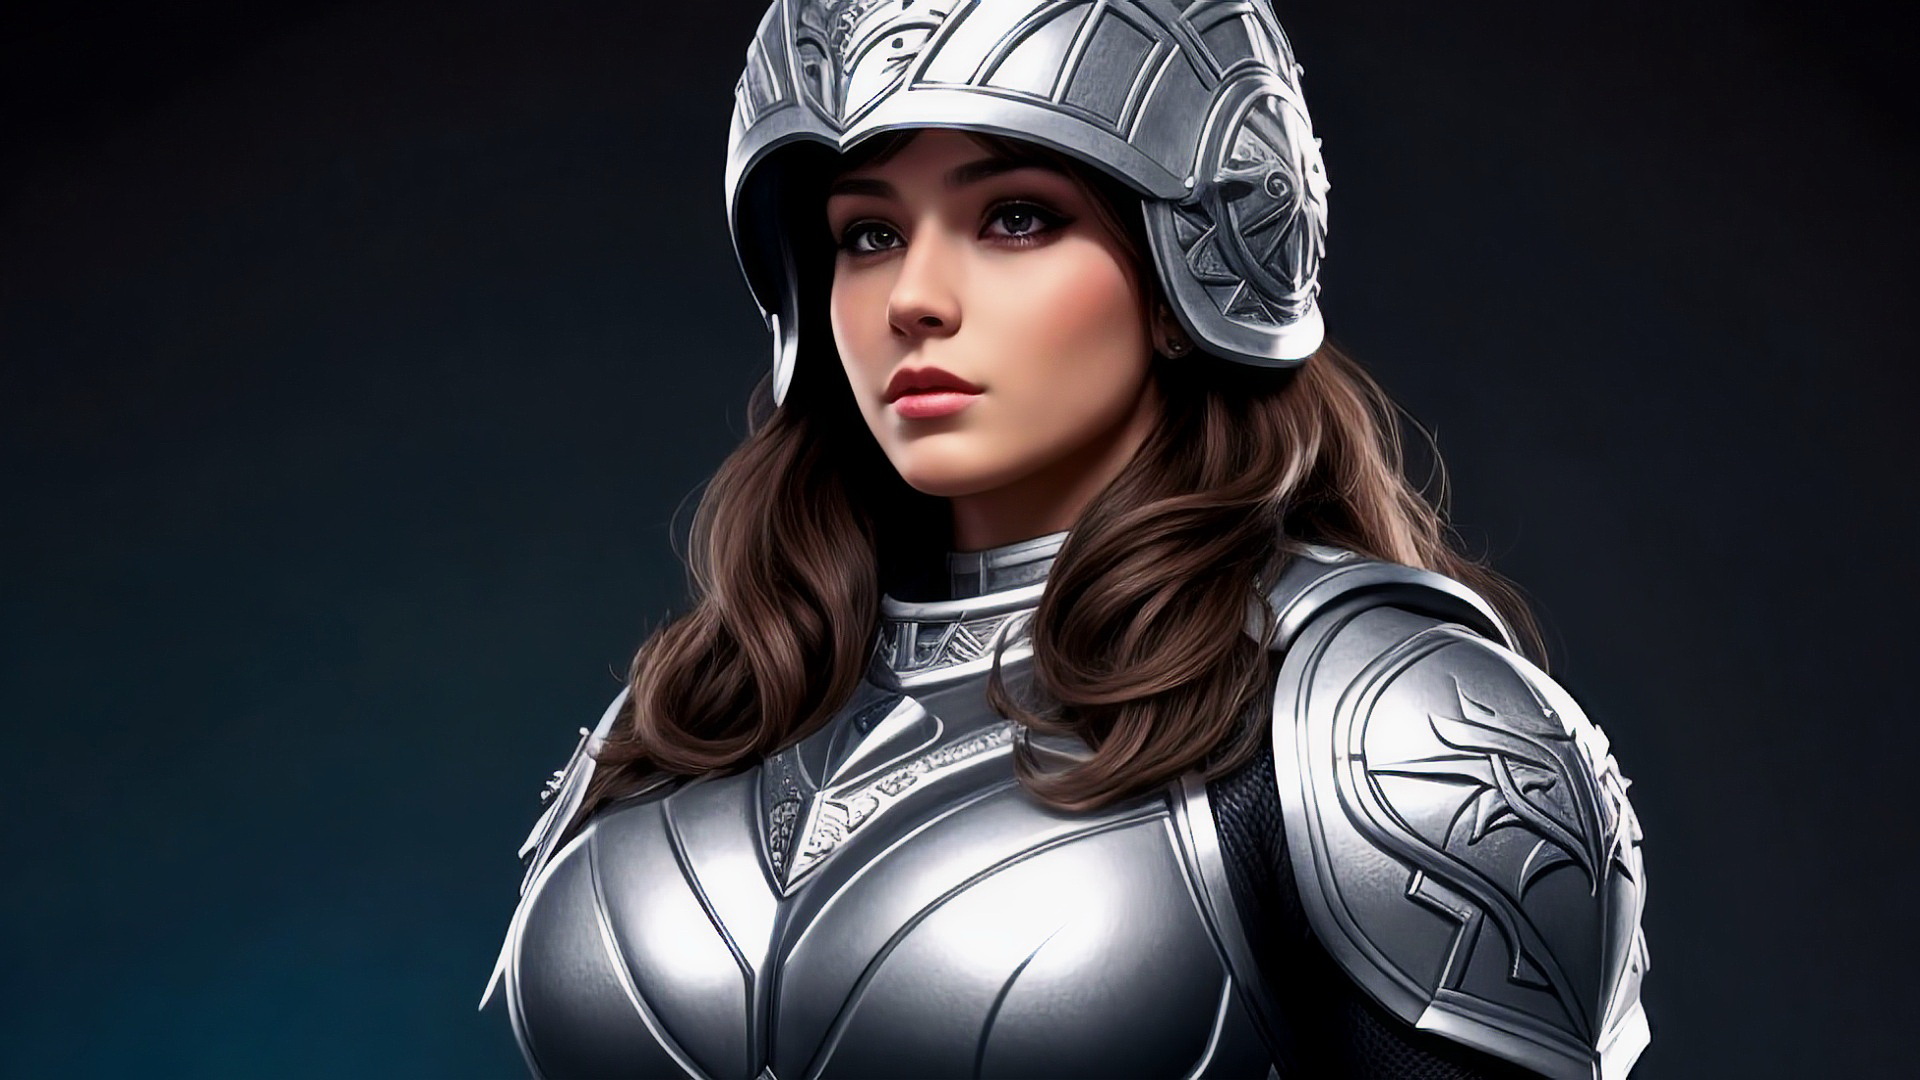 Free photo Girl knight in helmet and armor on dark background